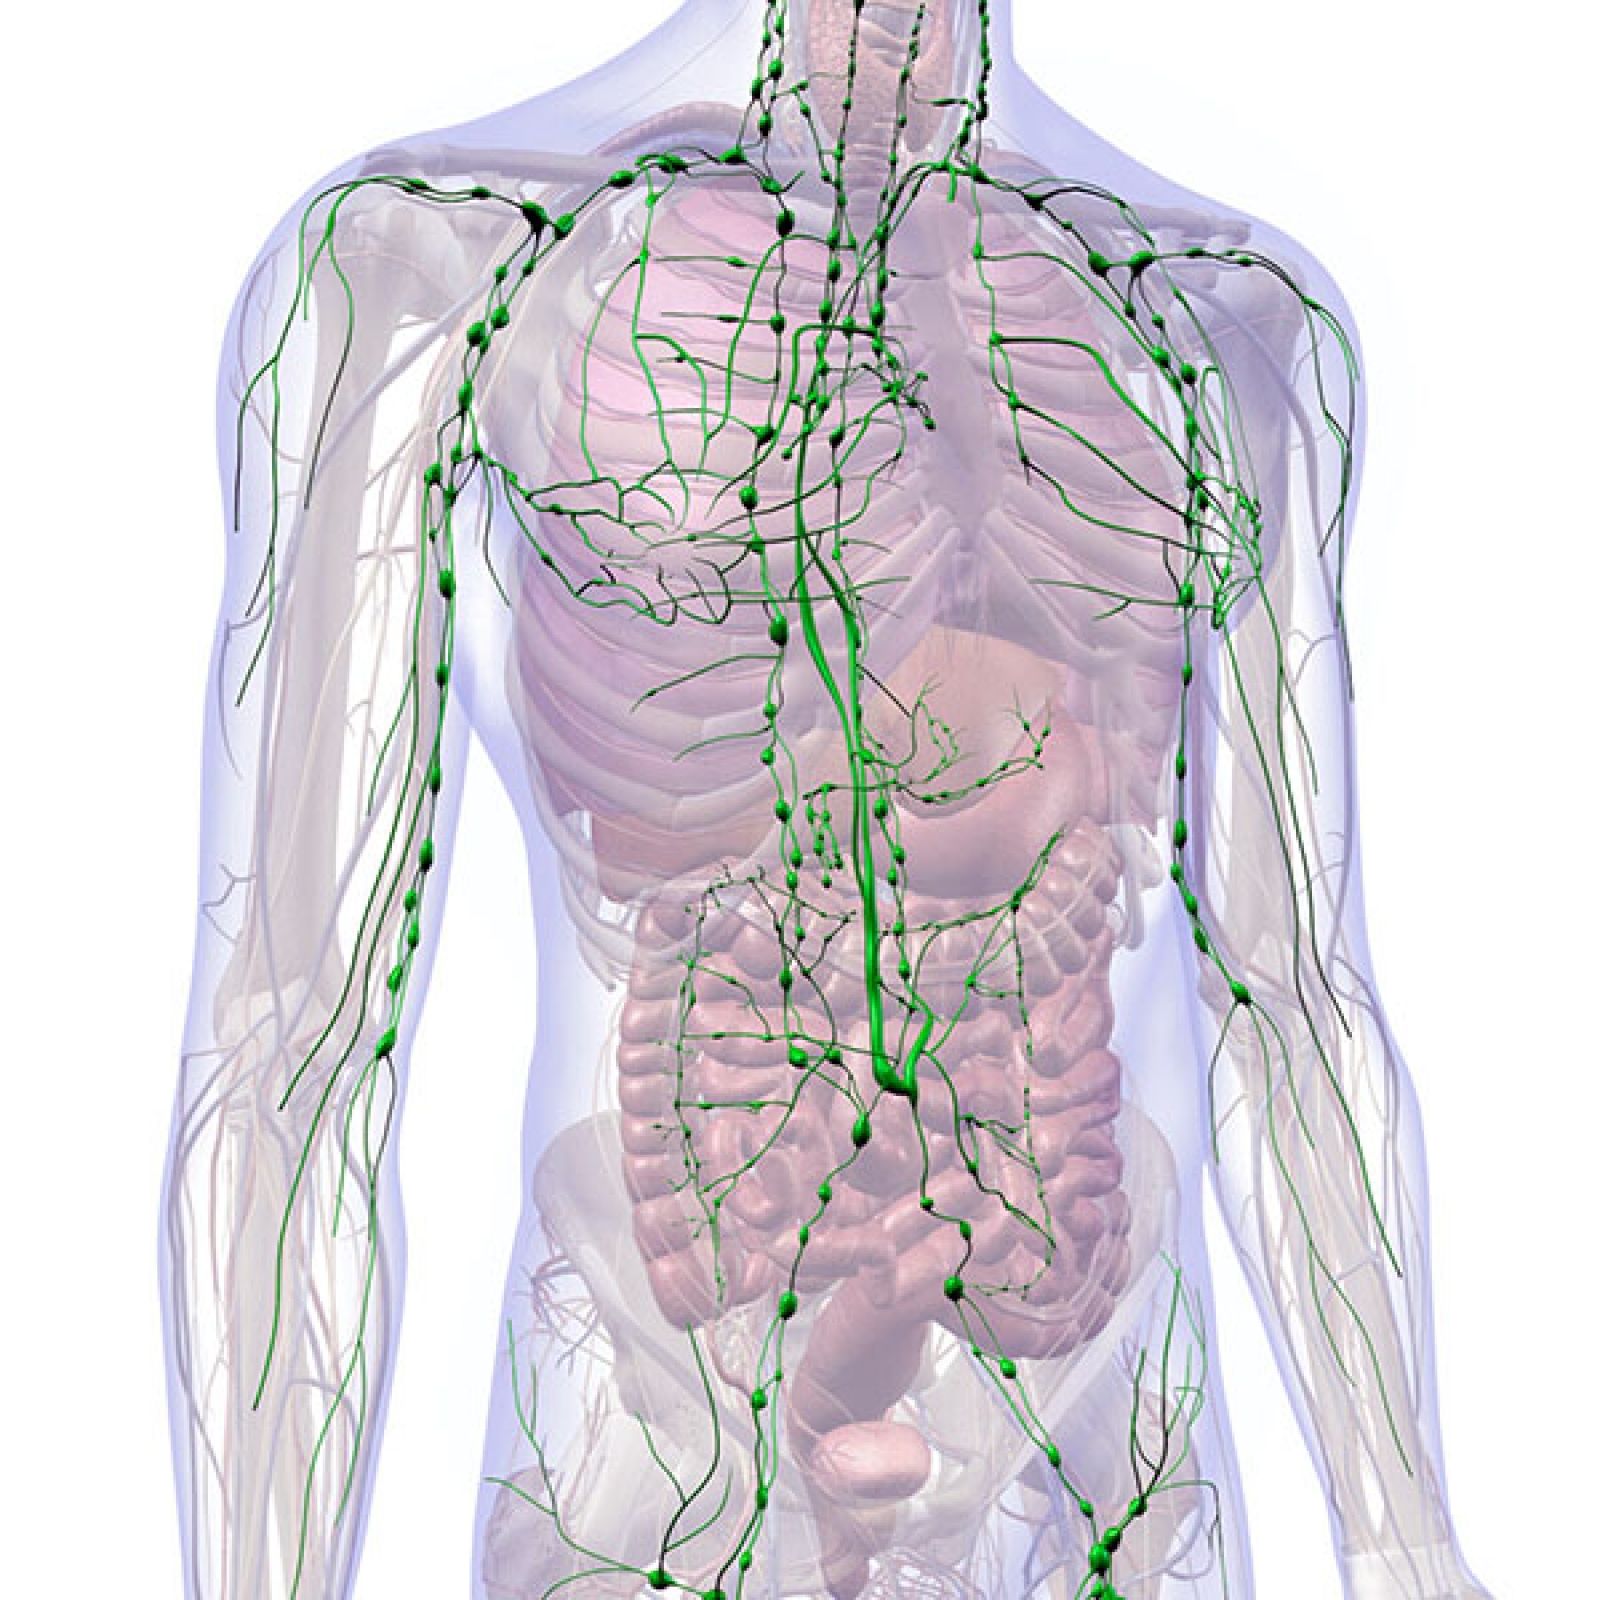 Lymphatic system structure and functions | AngioLife advice from a lymphologist